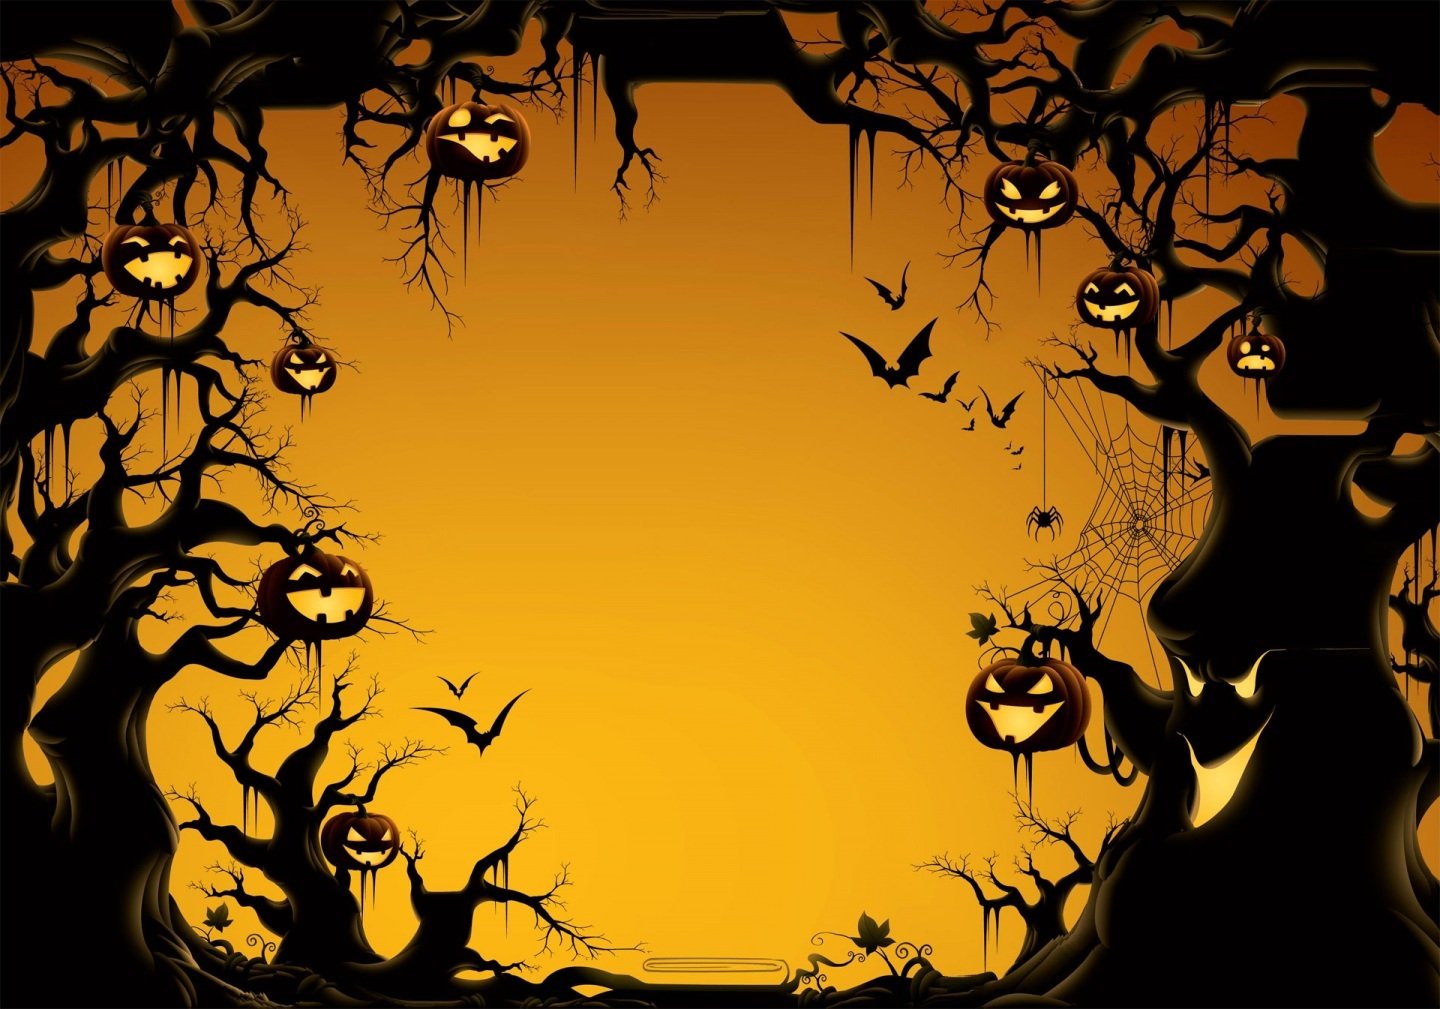 FREE Printable Halloween Invitations Templates Download Hundreds FREE